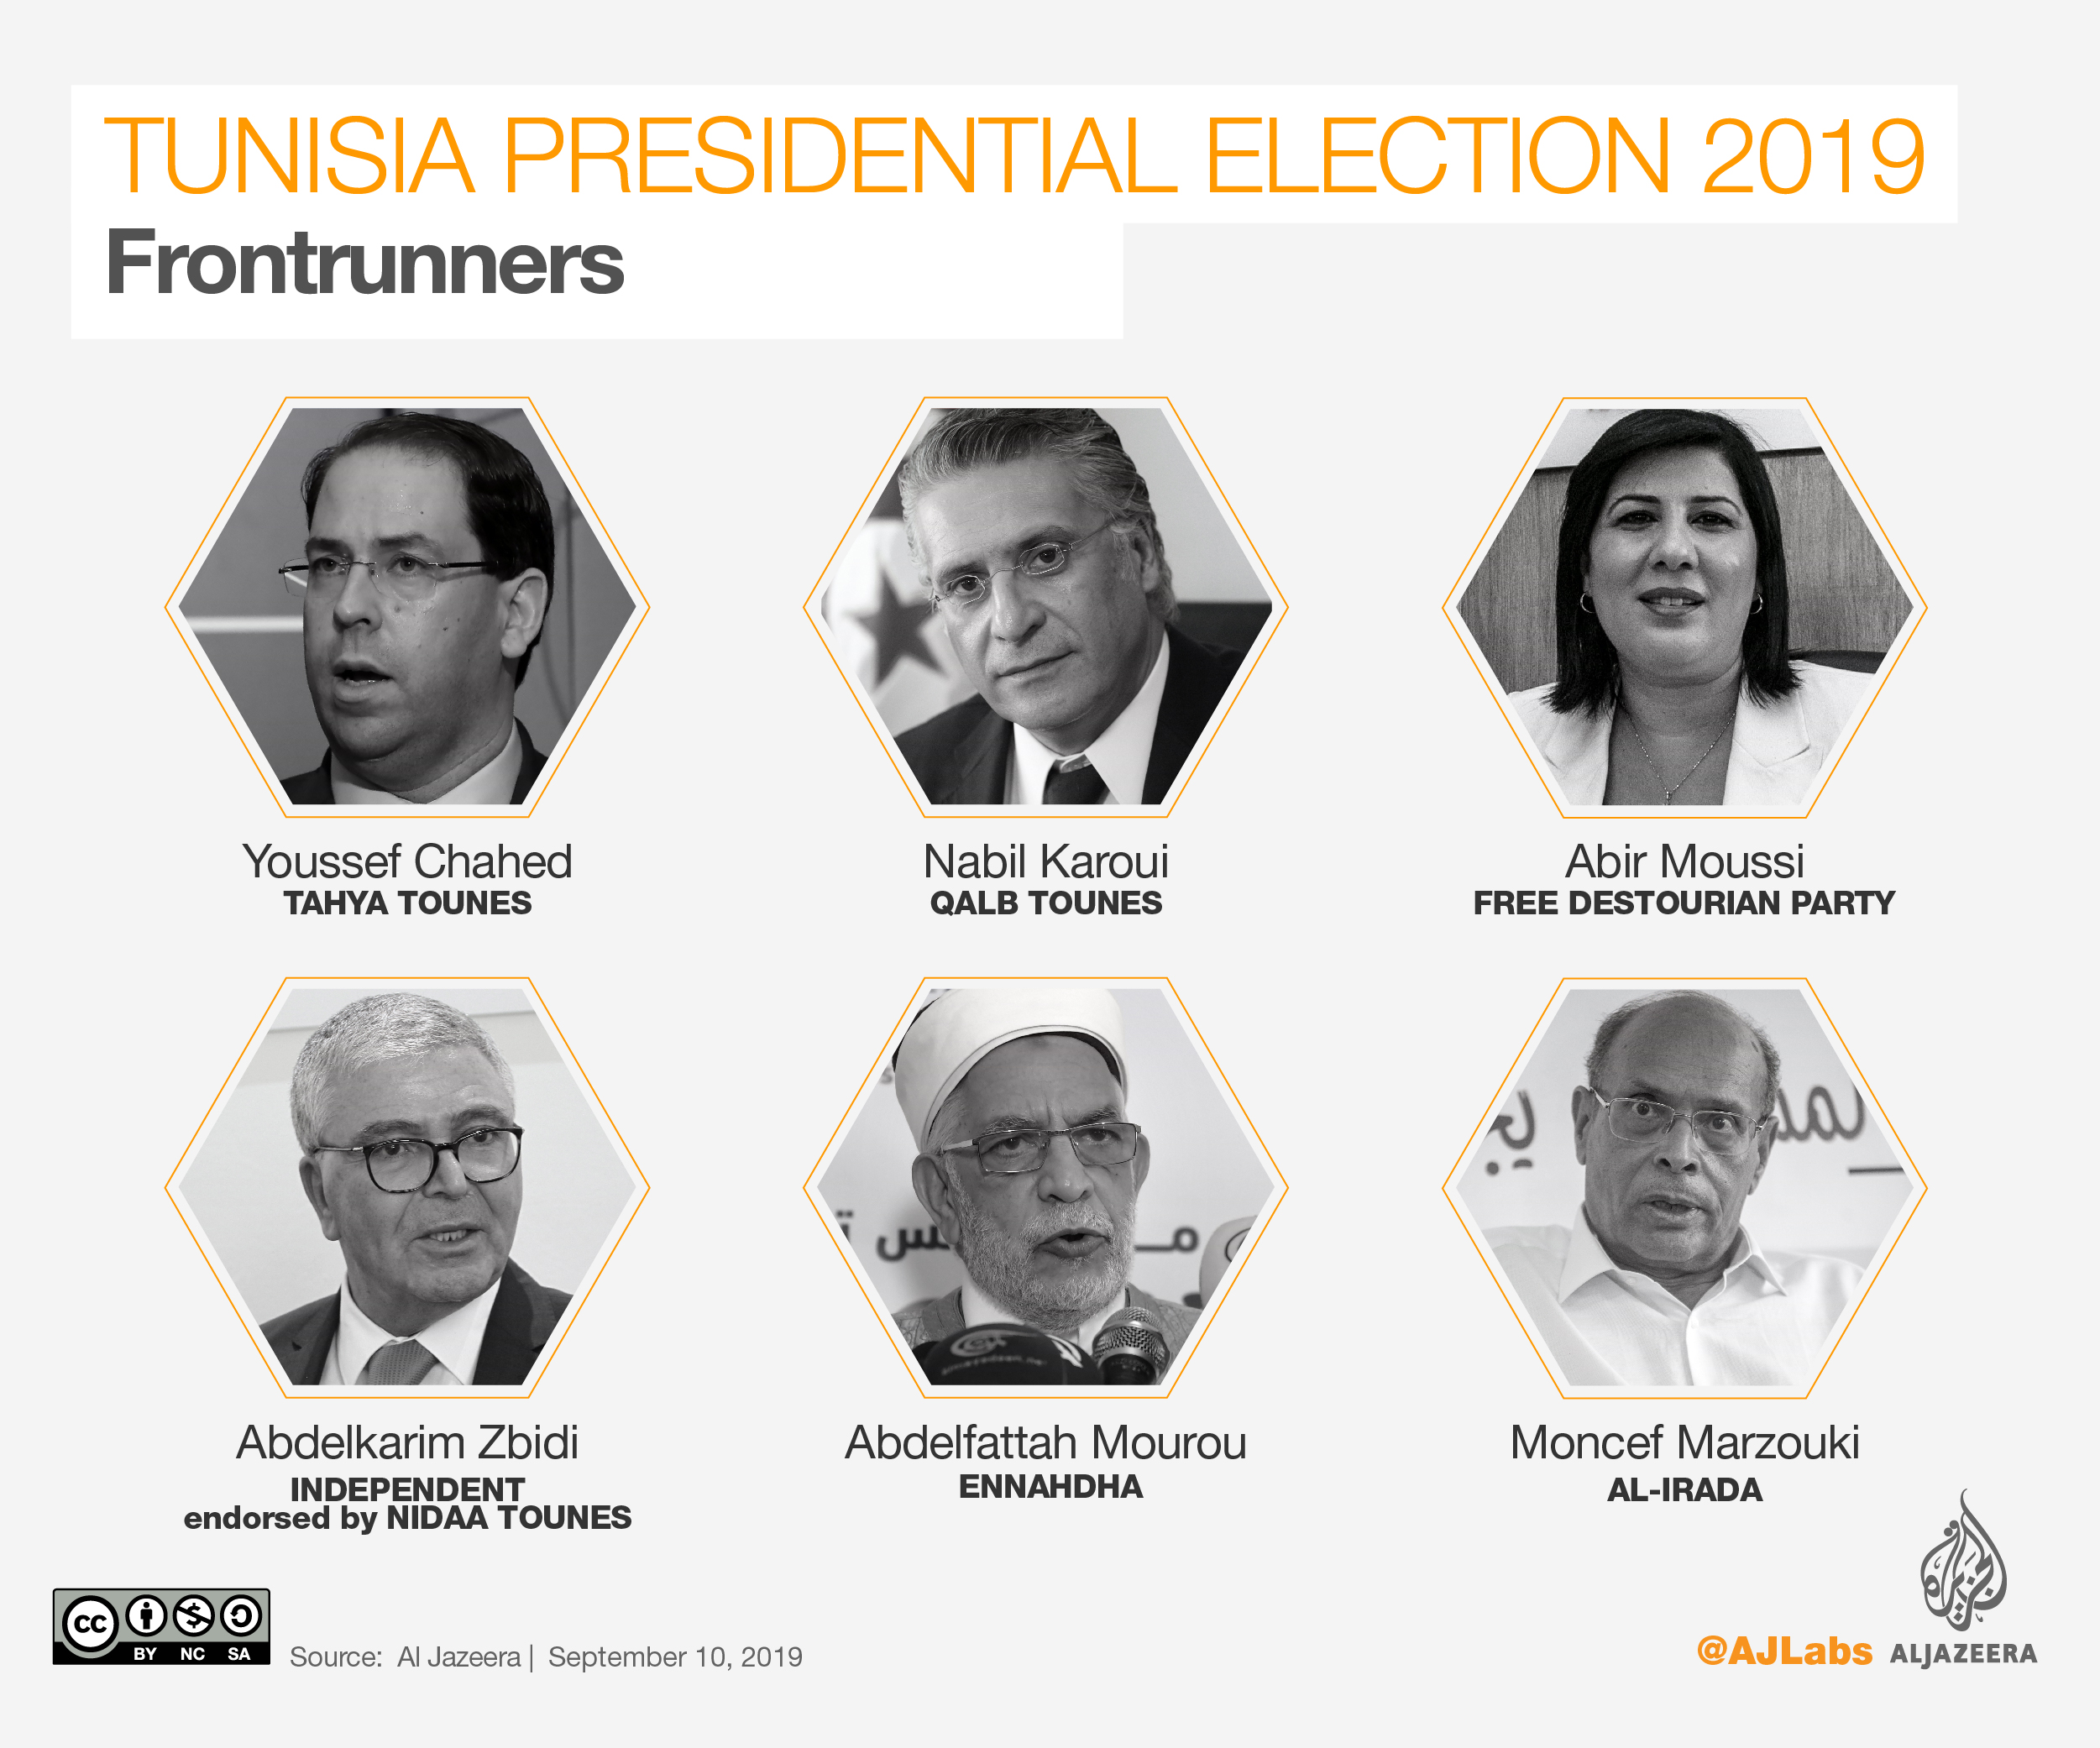 INTERACTIVE: Tunisia presidential elections 2019 - Candidates 